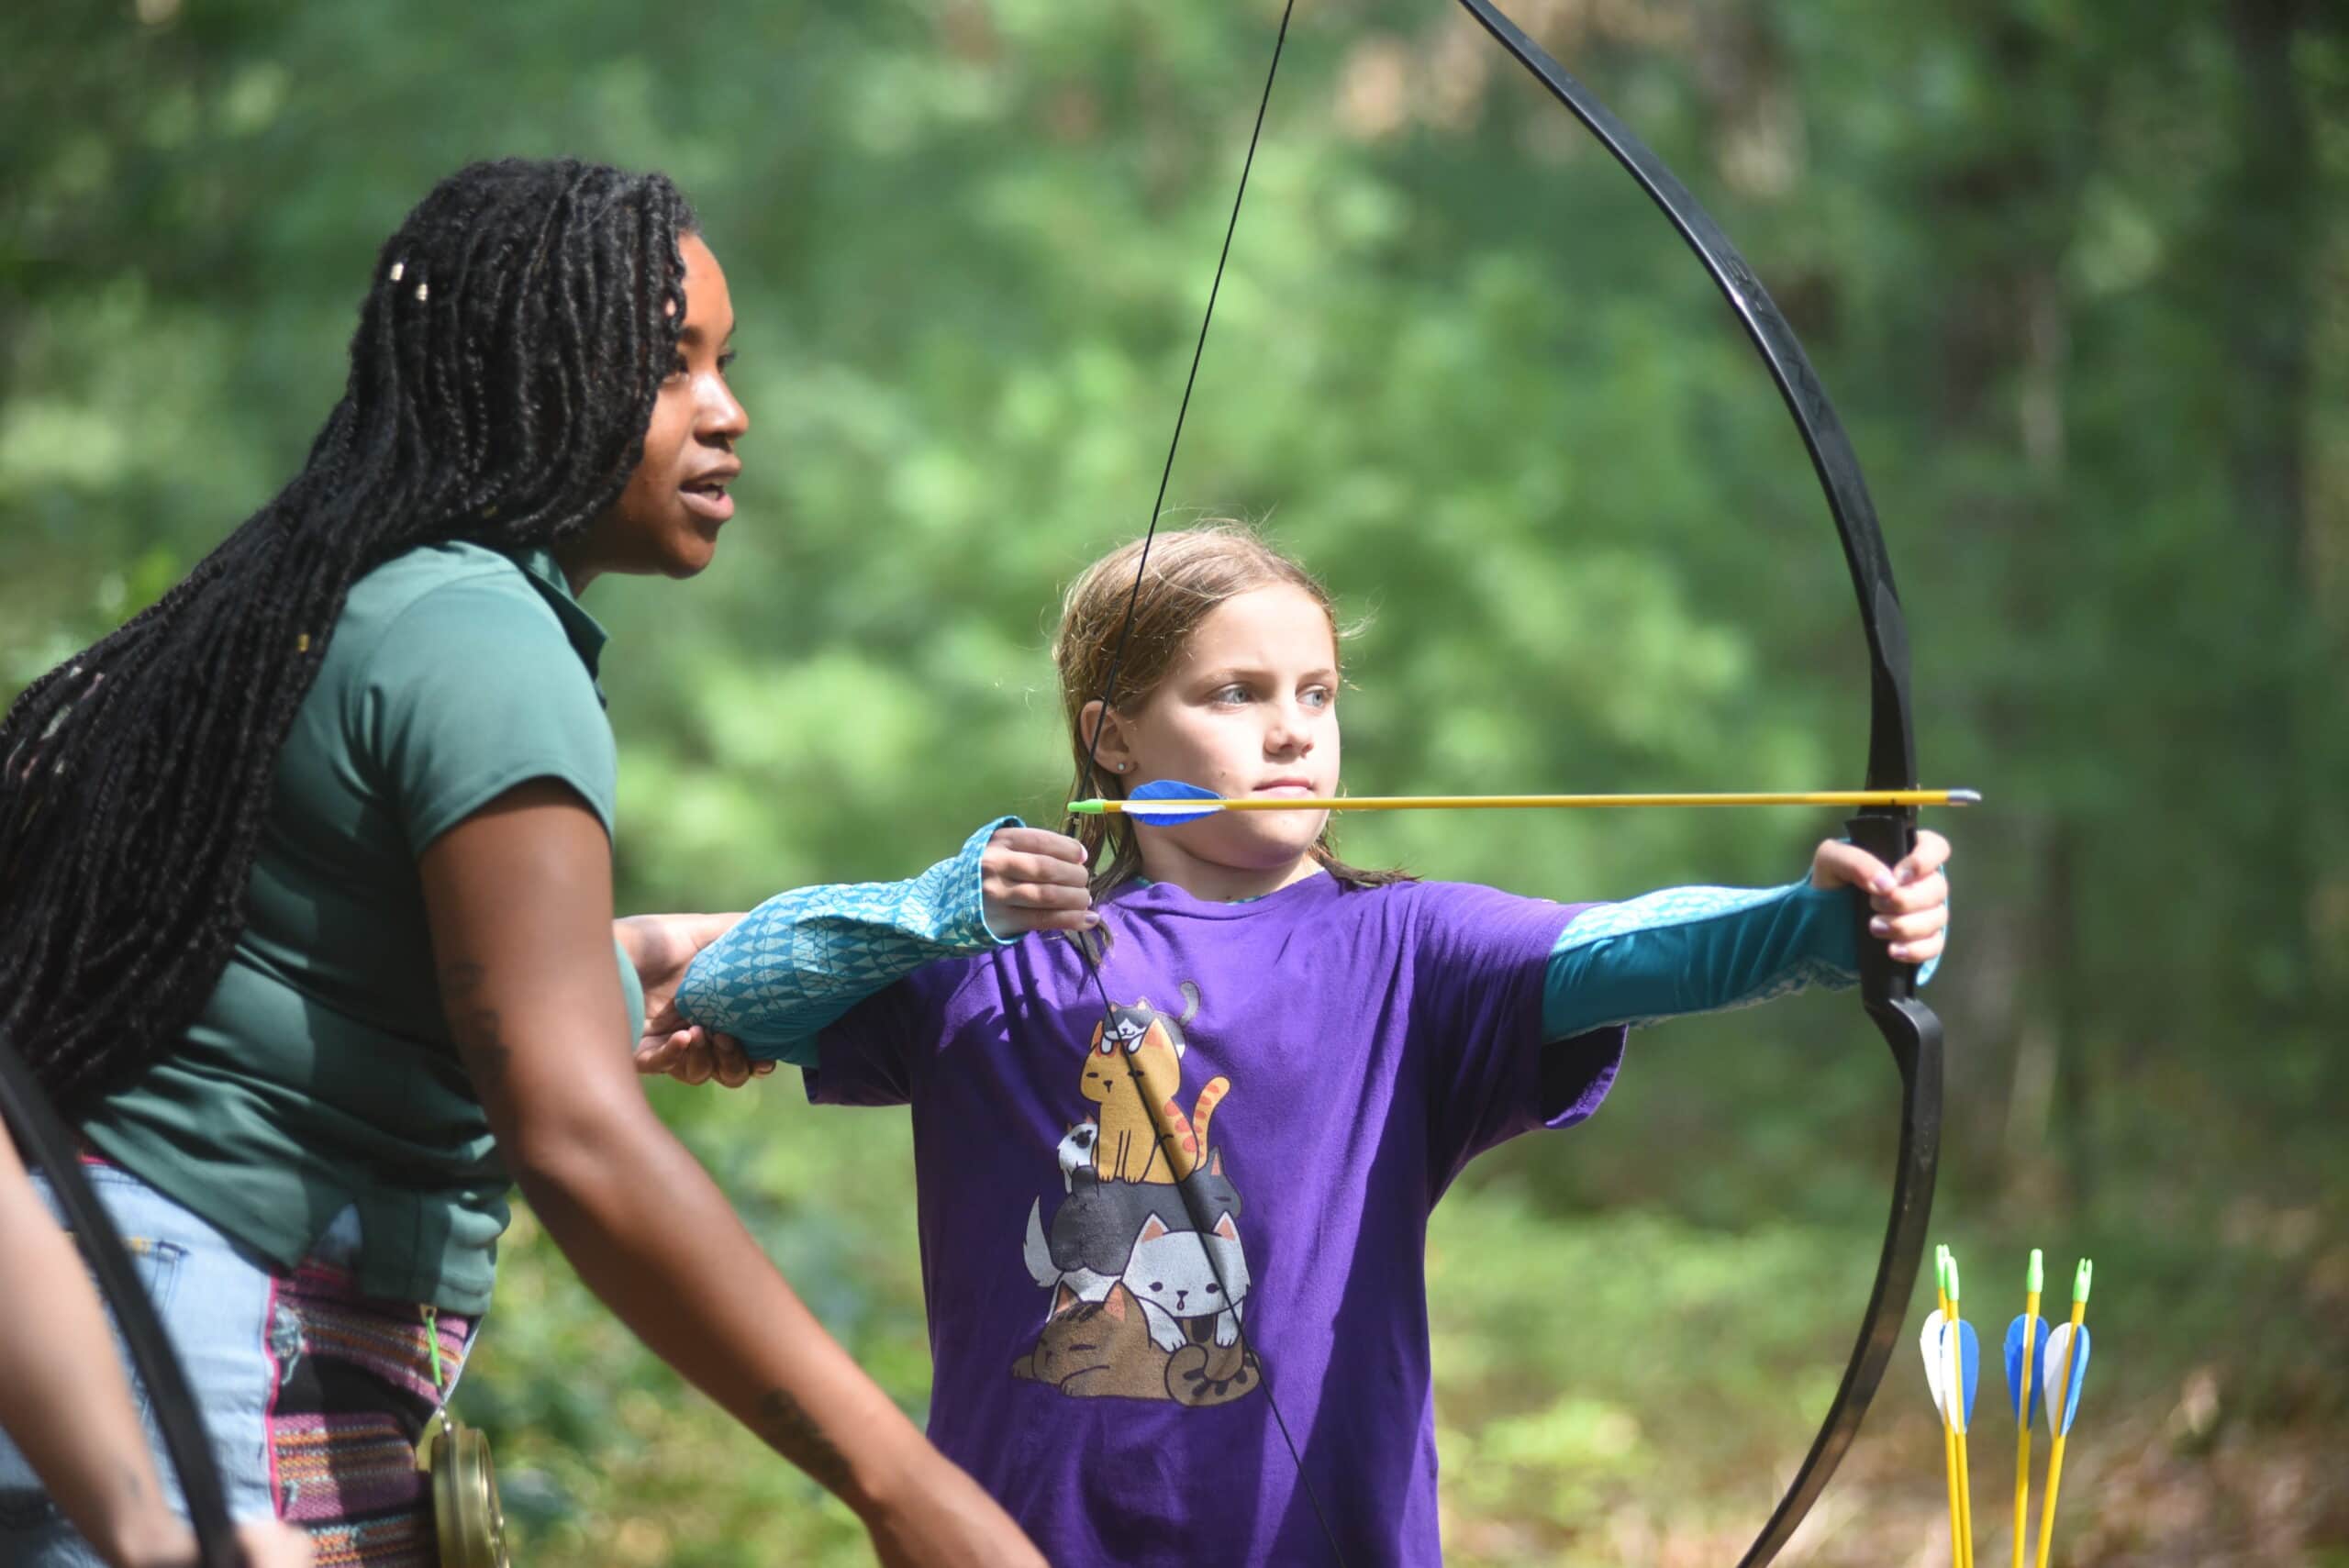 An archery instructor teaches a young student to shoot a bow and arrow.